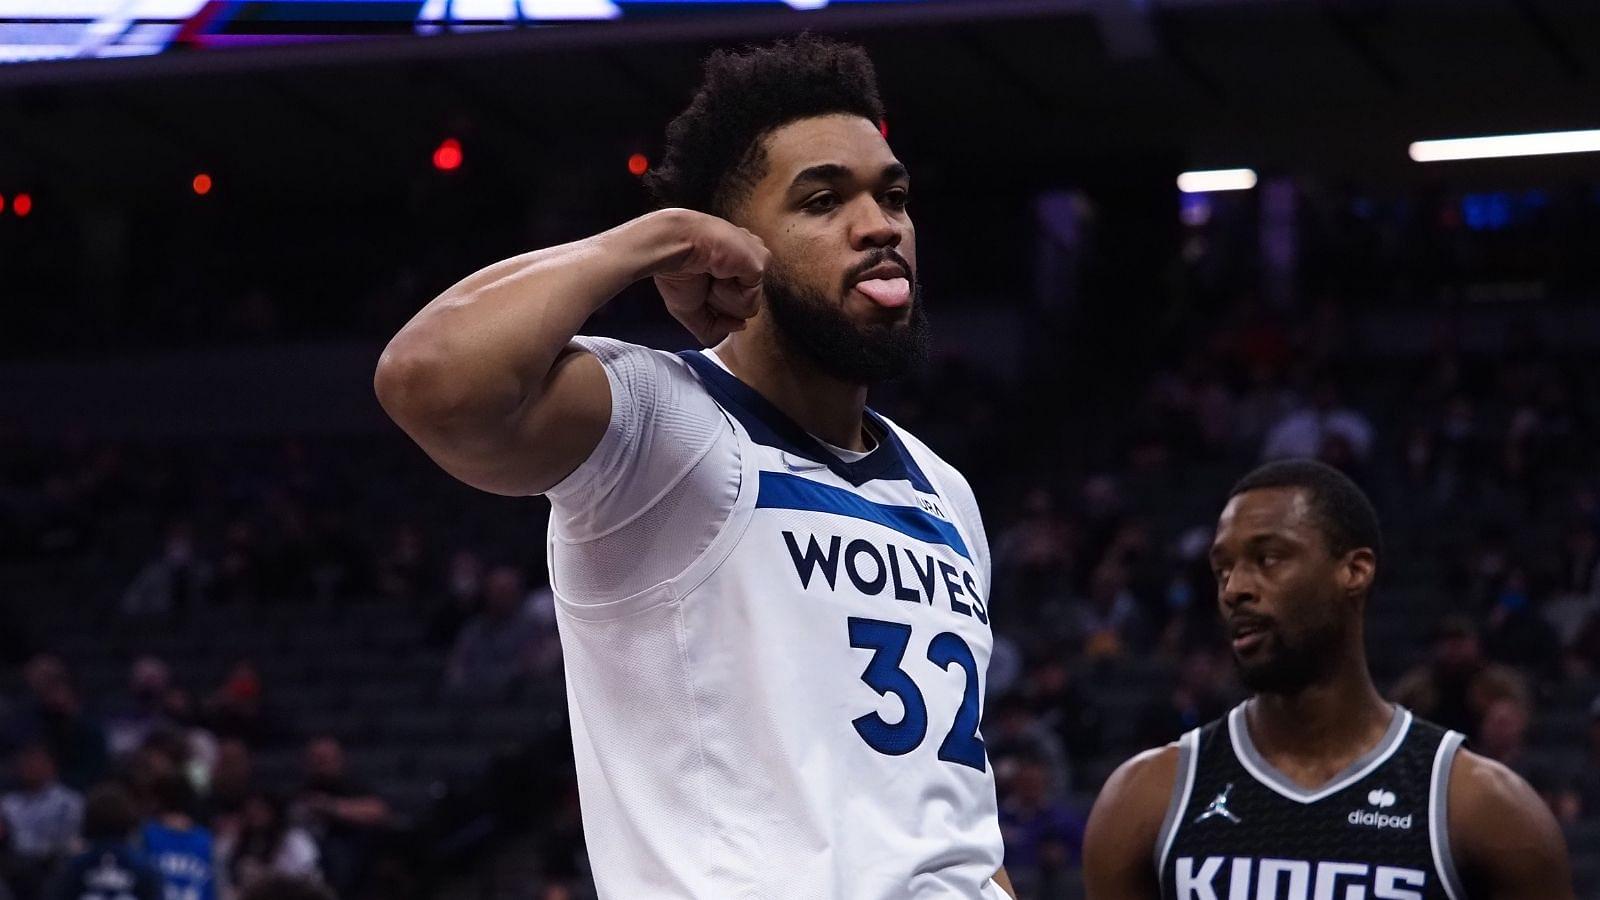 "My 9-year old is heartbroken that Karl-Anthony Towns lied about Wordle": NBA Twitter slams the Wolves All-Star for being dishonest about his score on the popular game